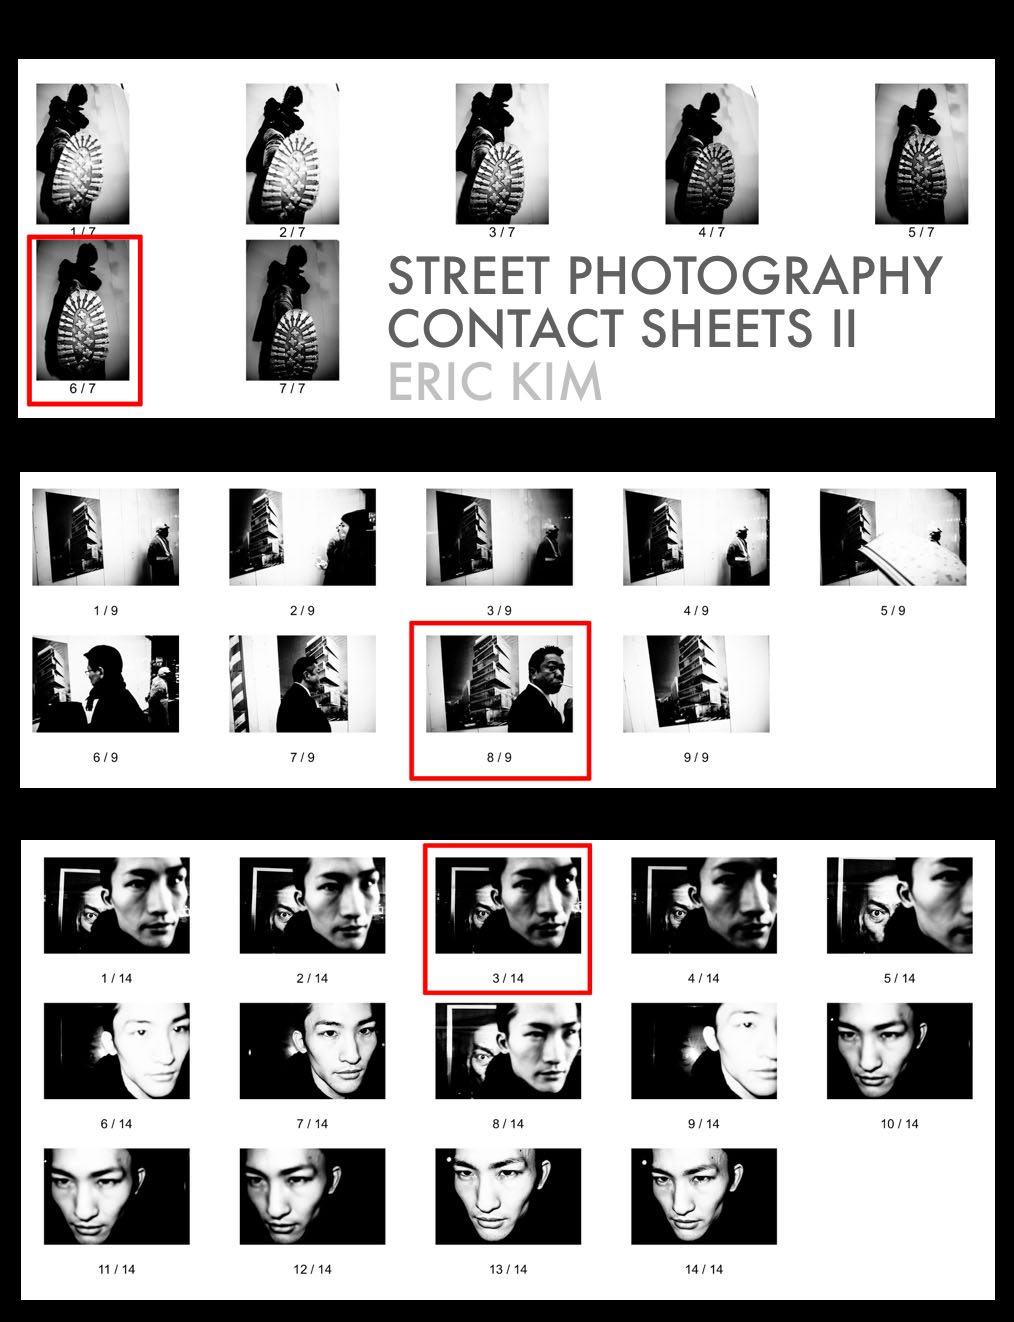 Street Photography Contact Sheets Volume II